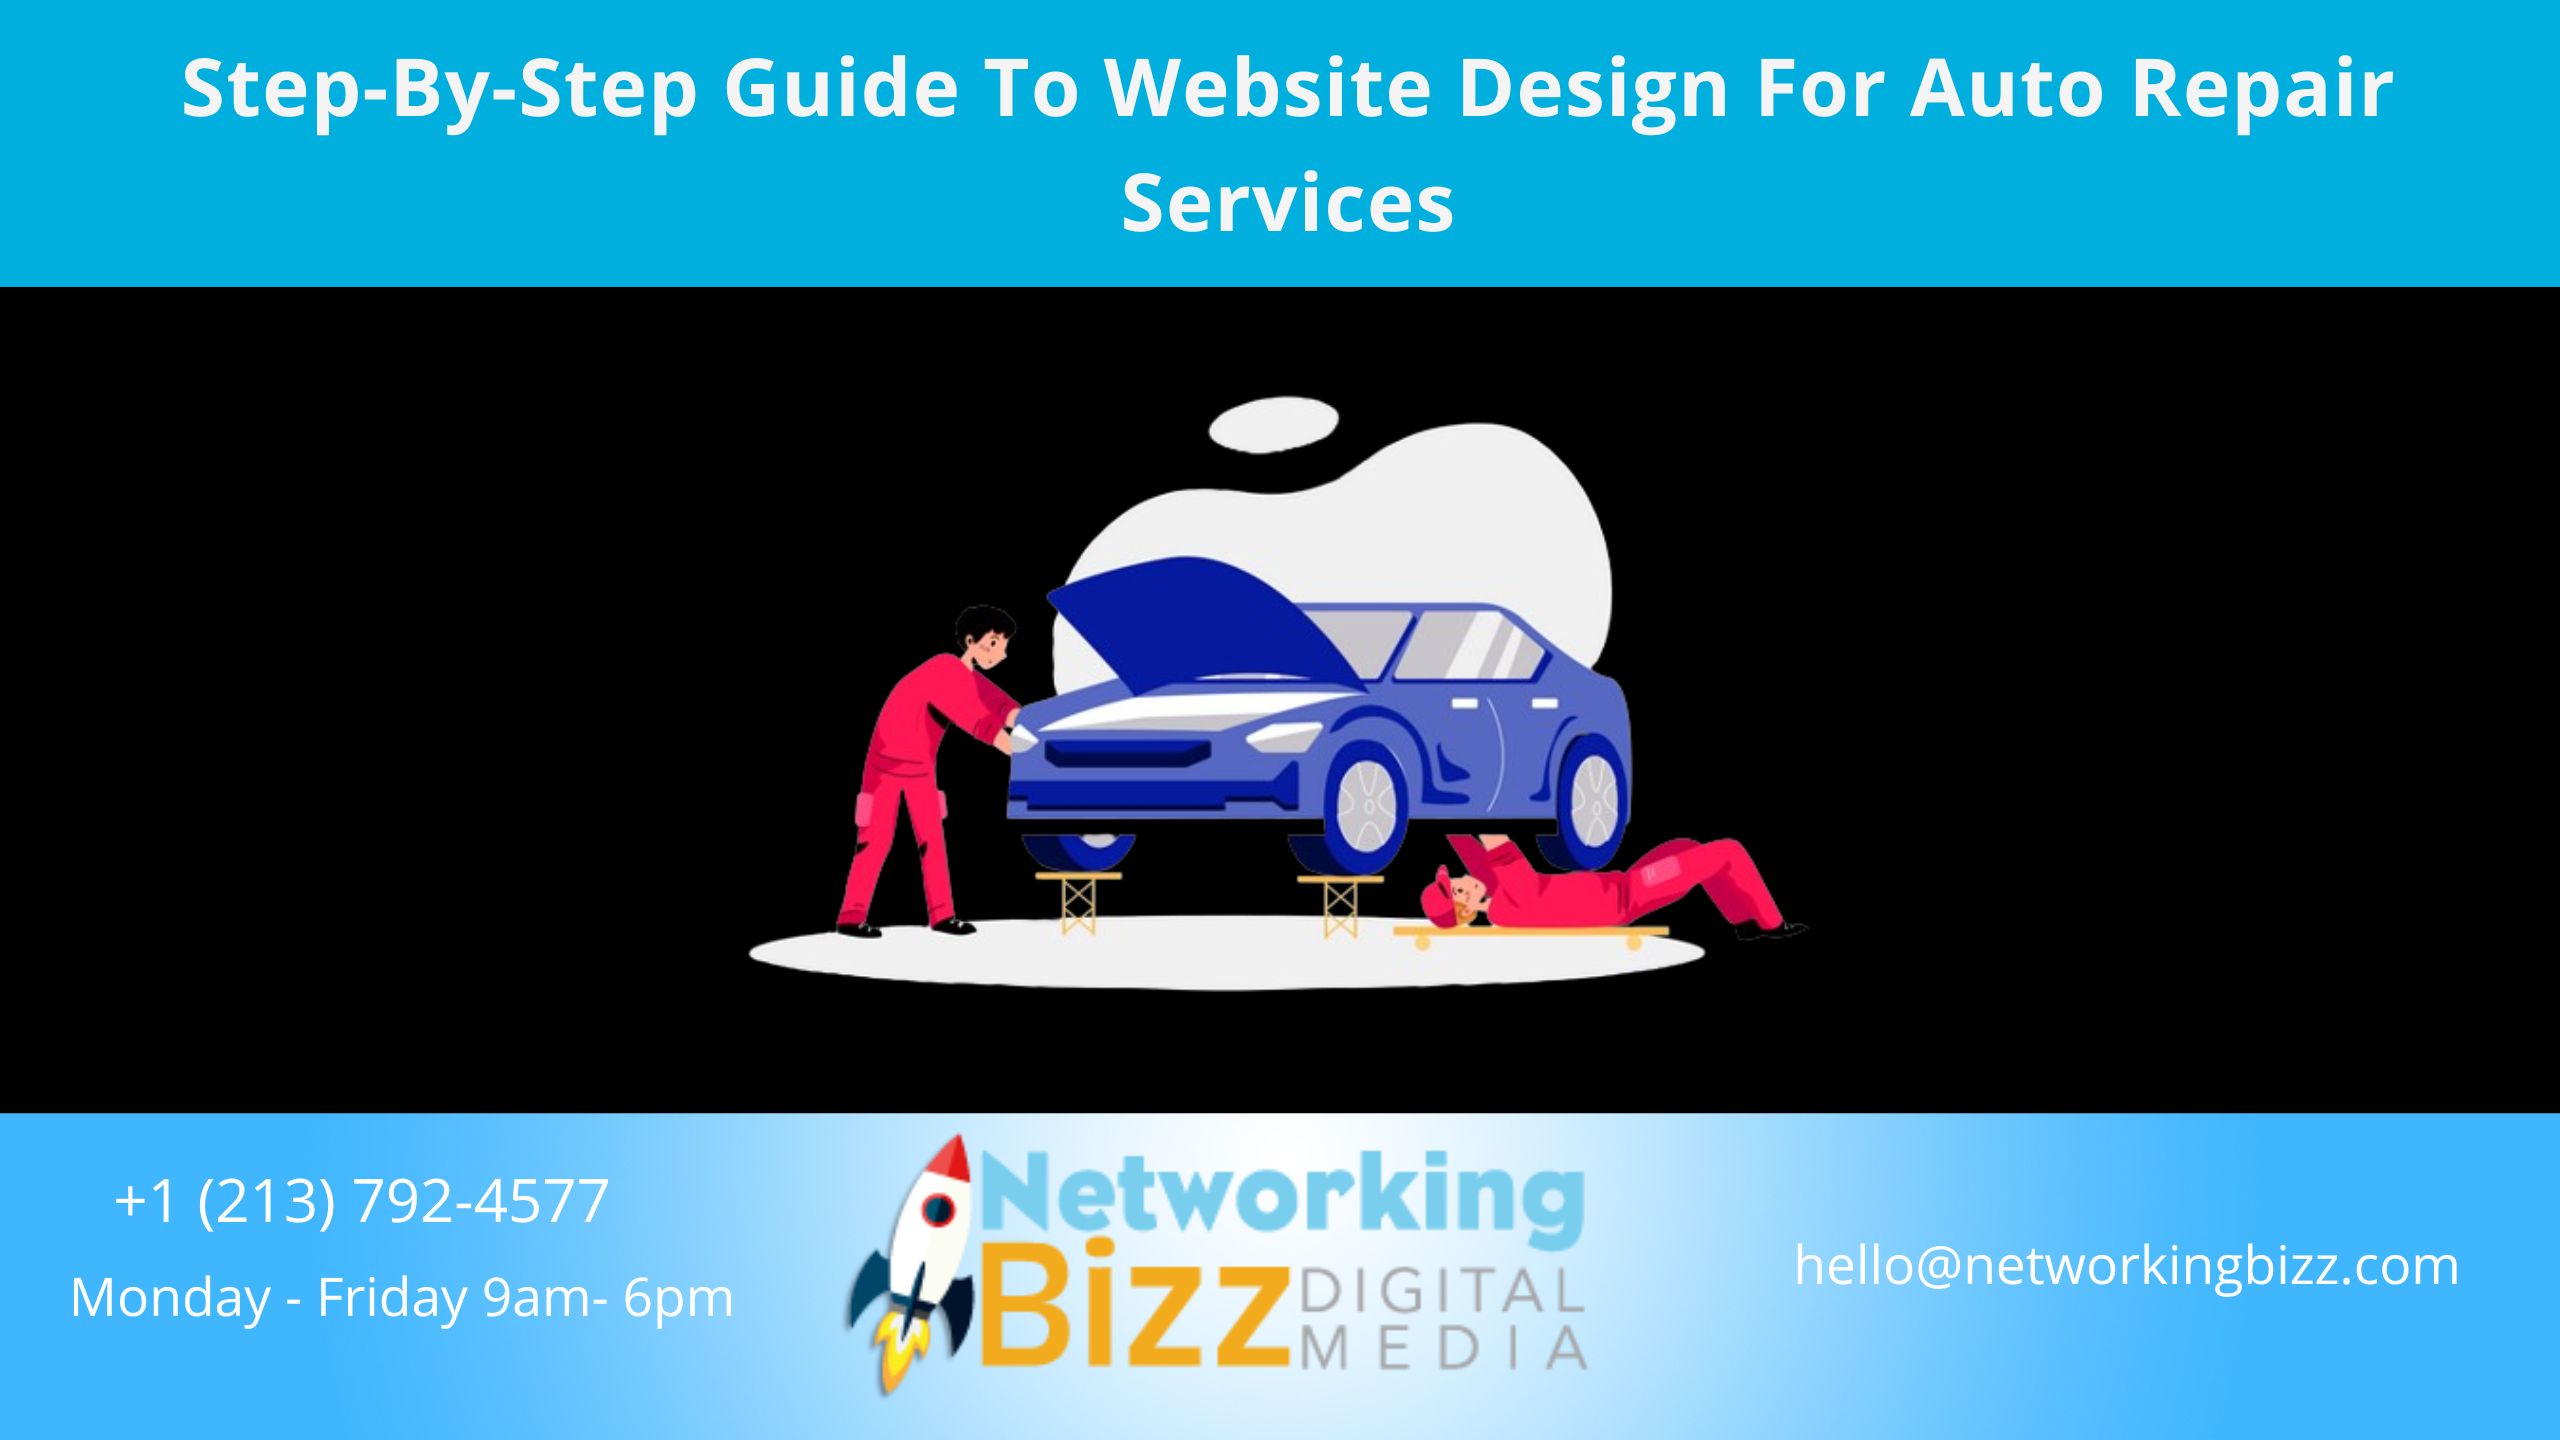 Step-By-Step Guide To Website Design For Auto Repair Services